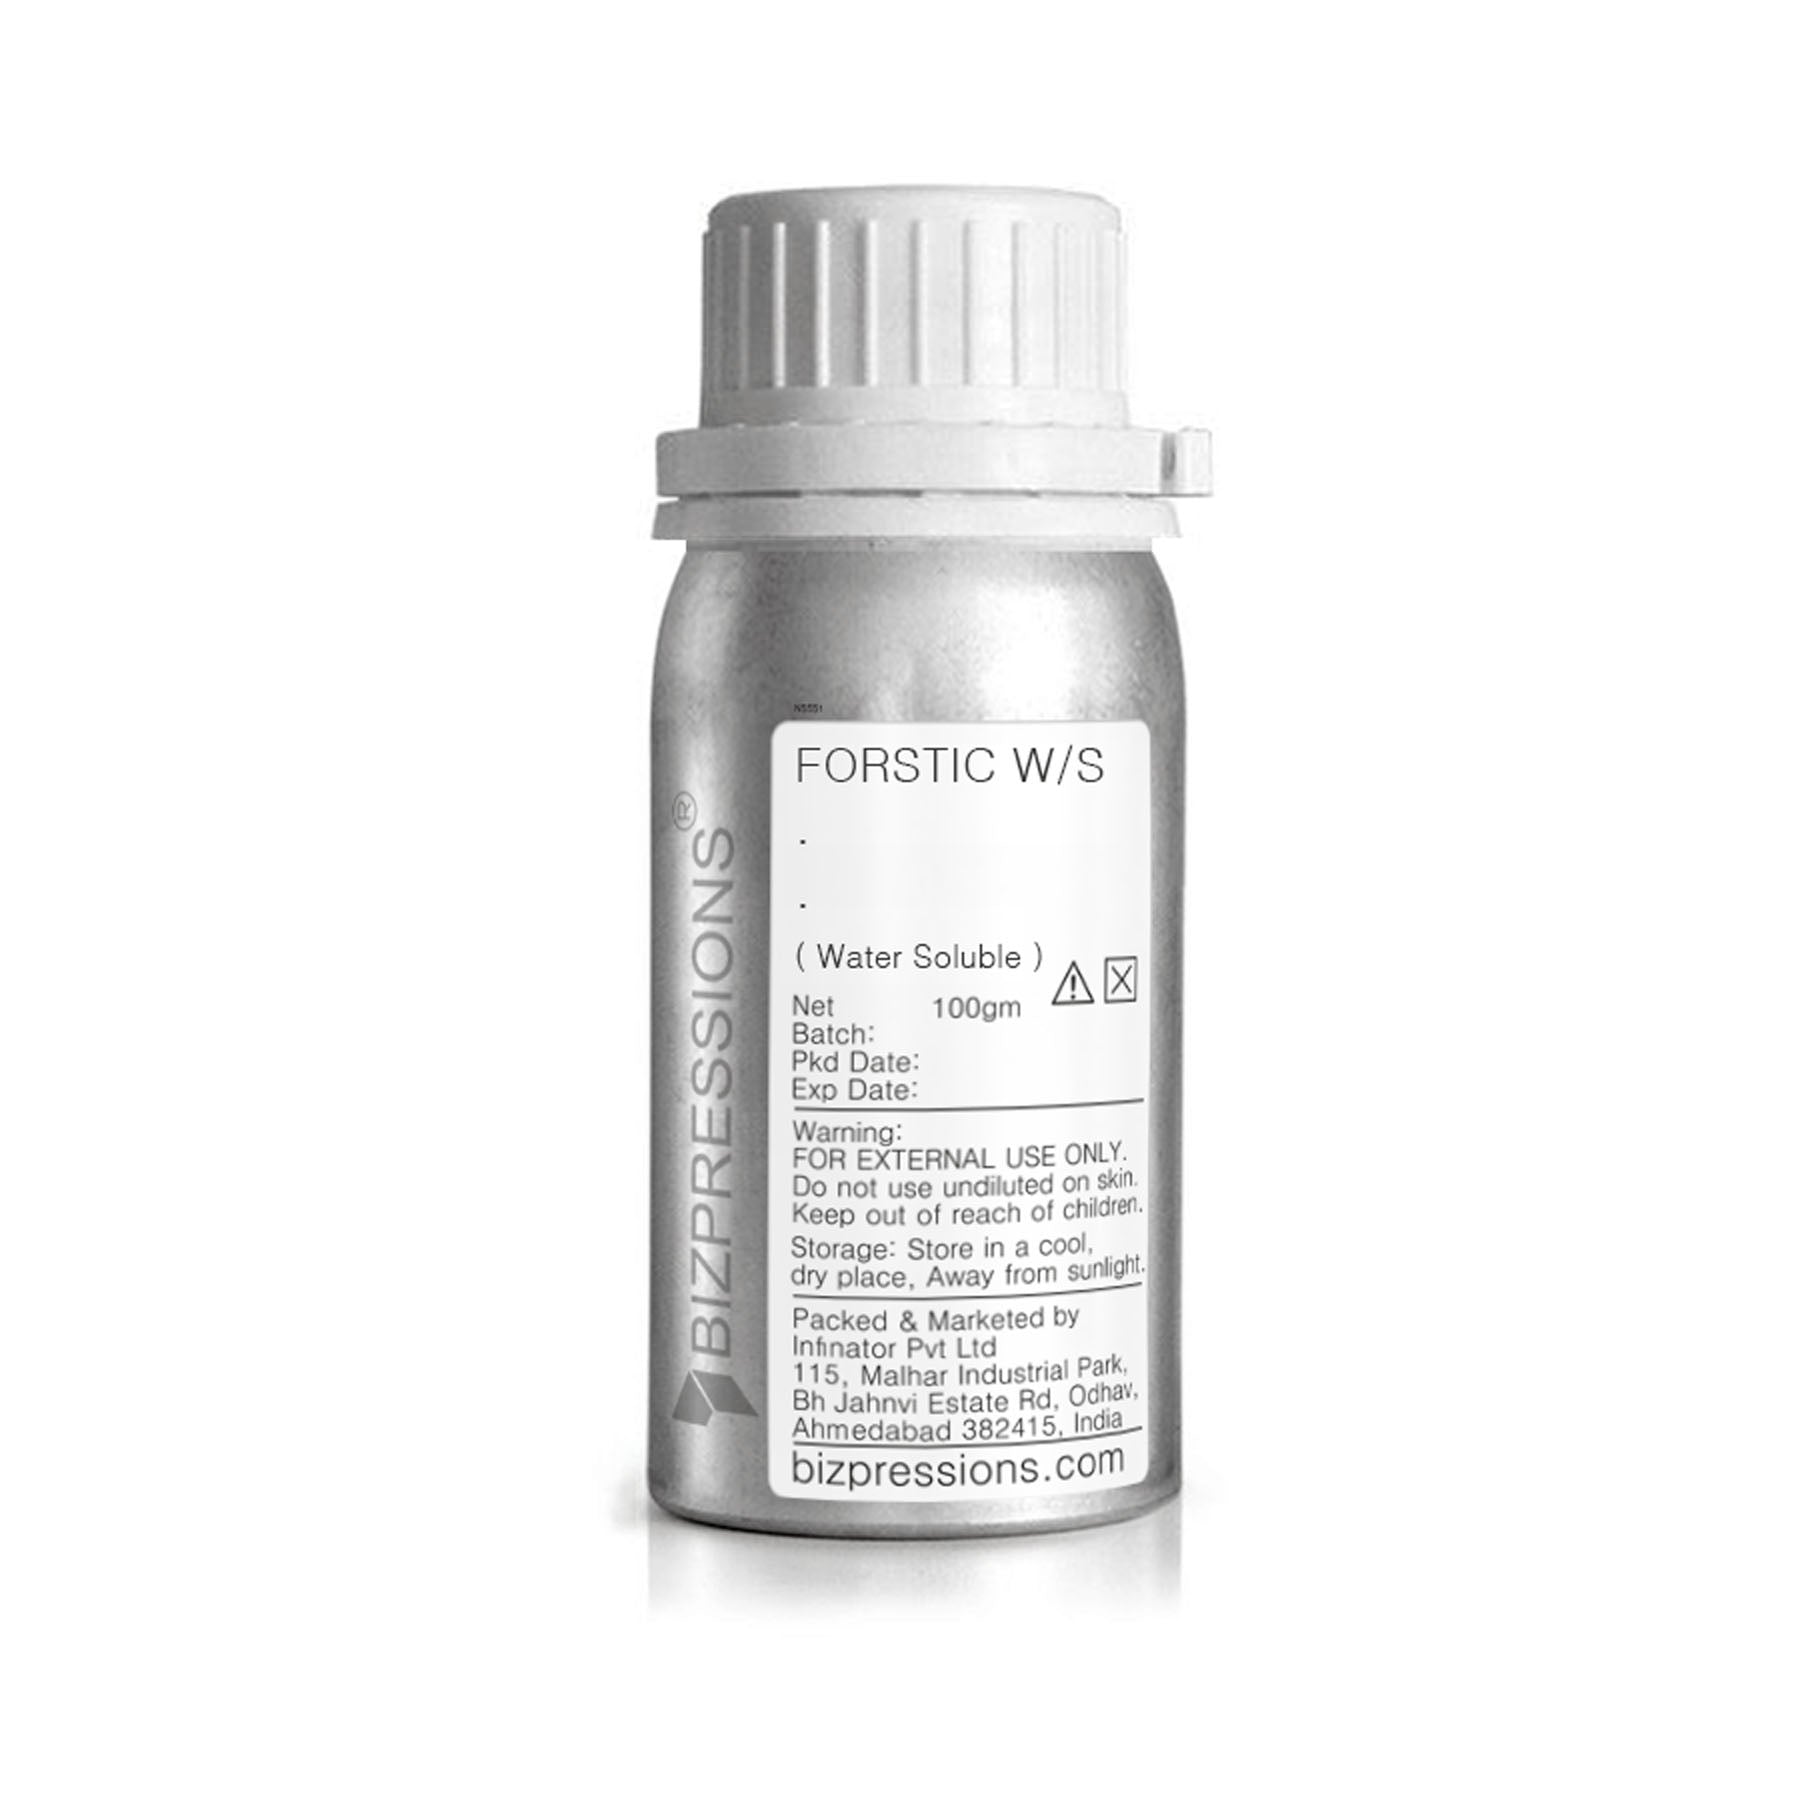 FORSTIC W/S - Fragrance ( Water Soluble ) - 100 gm